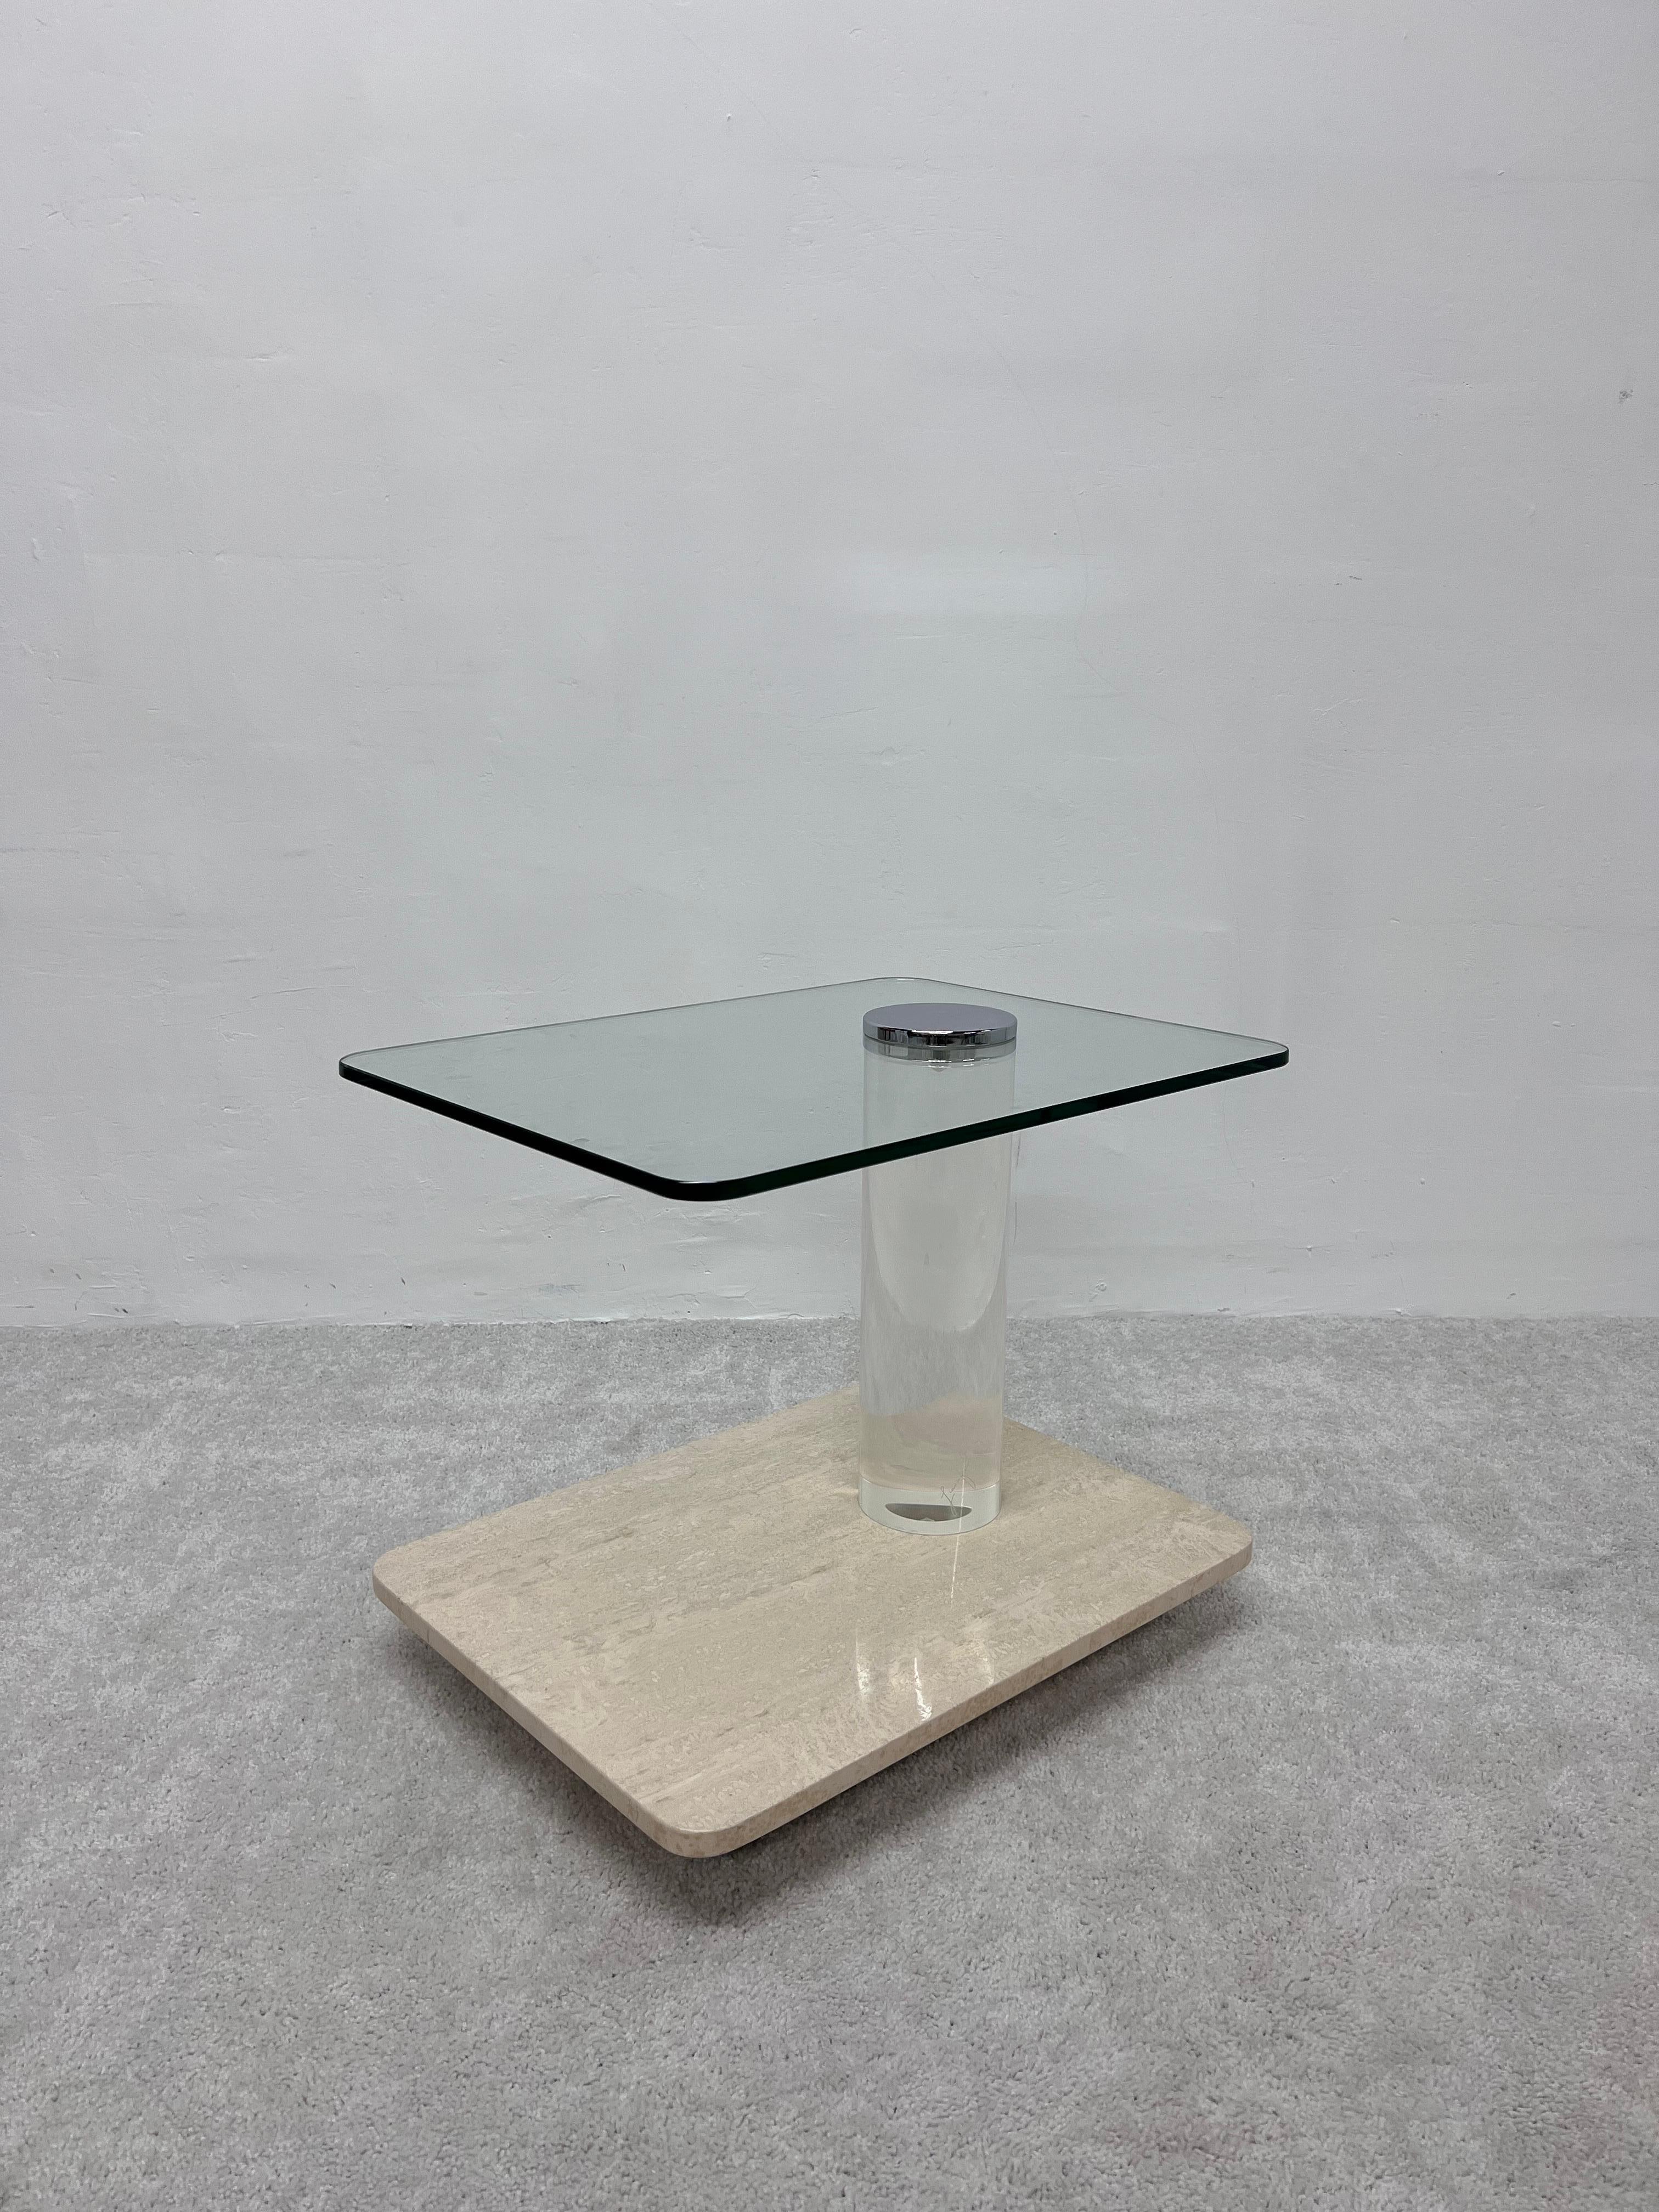 Lion in Frost modern side or cocktail table with lower brass banding, travertine shelf and a cantilevered glass top on a thick lucite column held in place by a polished chrome cap, 1970s.

Table top height: 20